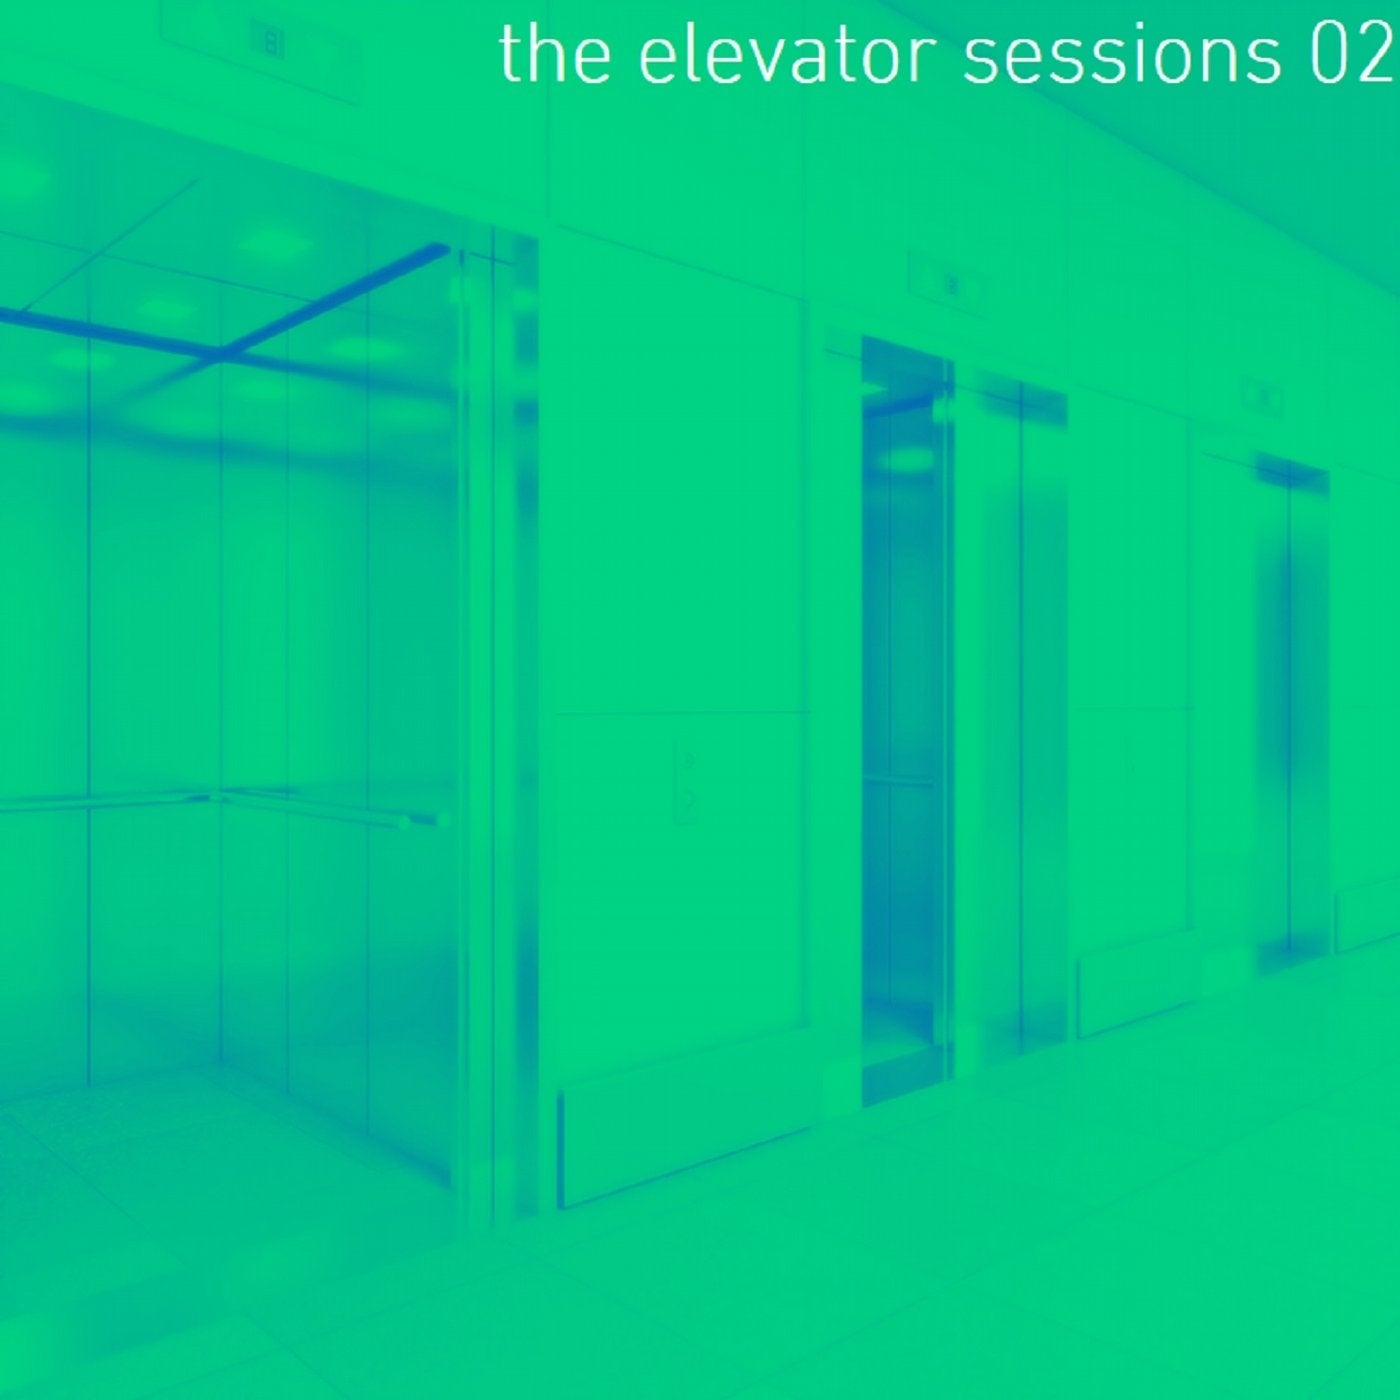 The Elevator Sessions 02 (Compiled & Mixed by Klangstein)